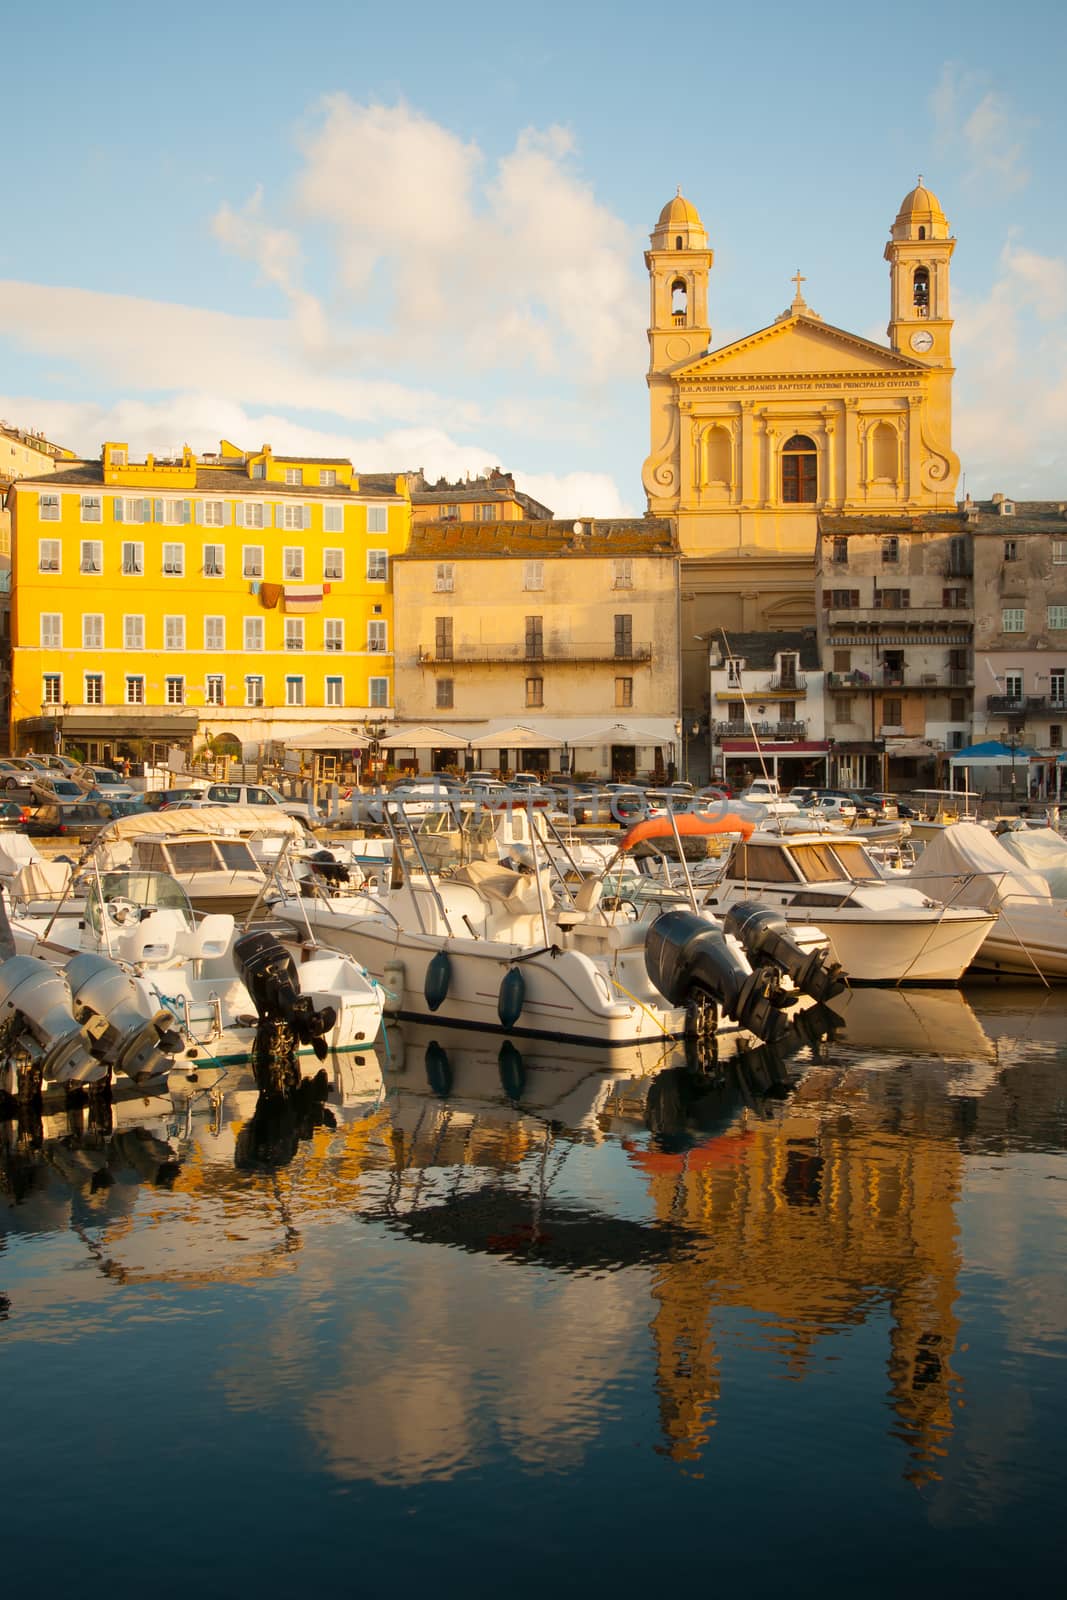 Scene of the old port (the Vieux Port), in Bastia, Corsica, France.